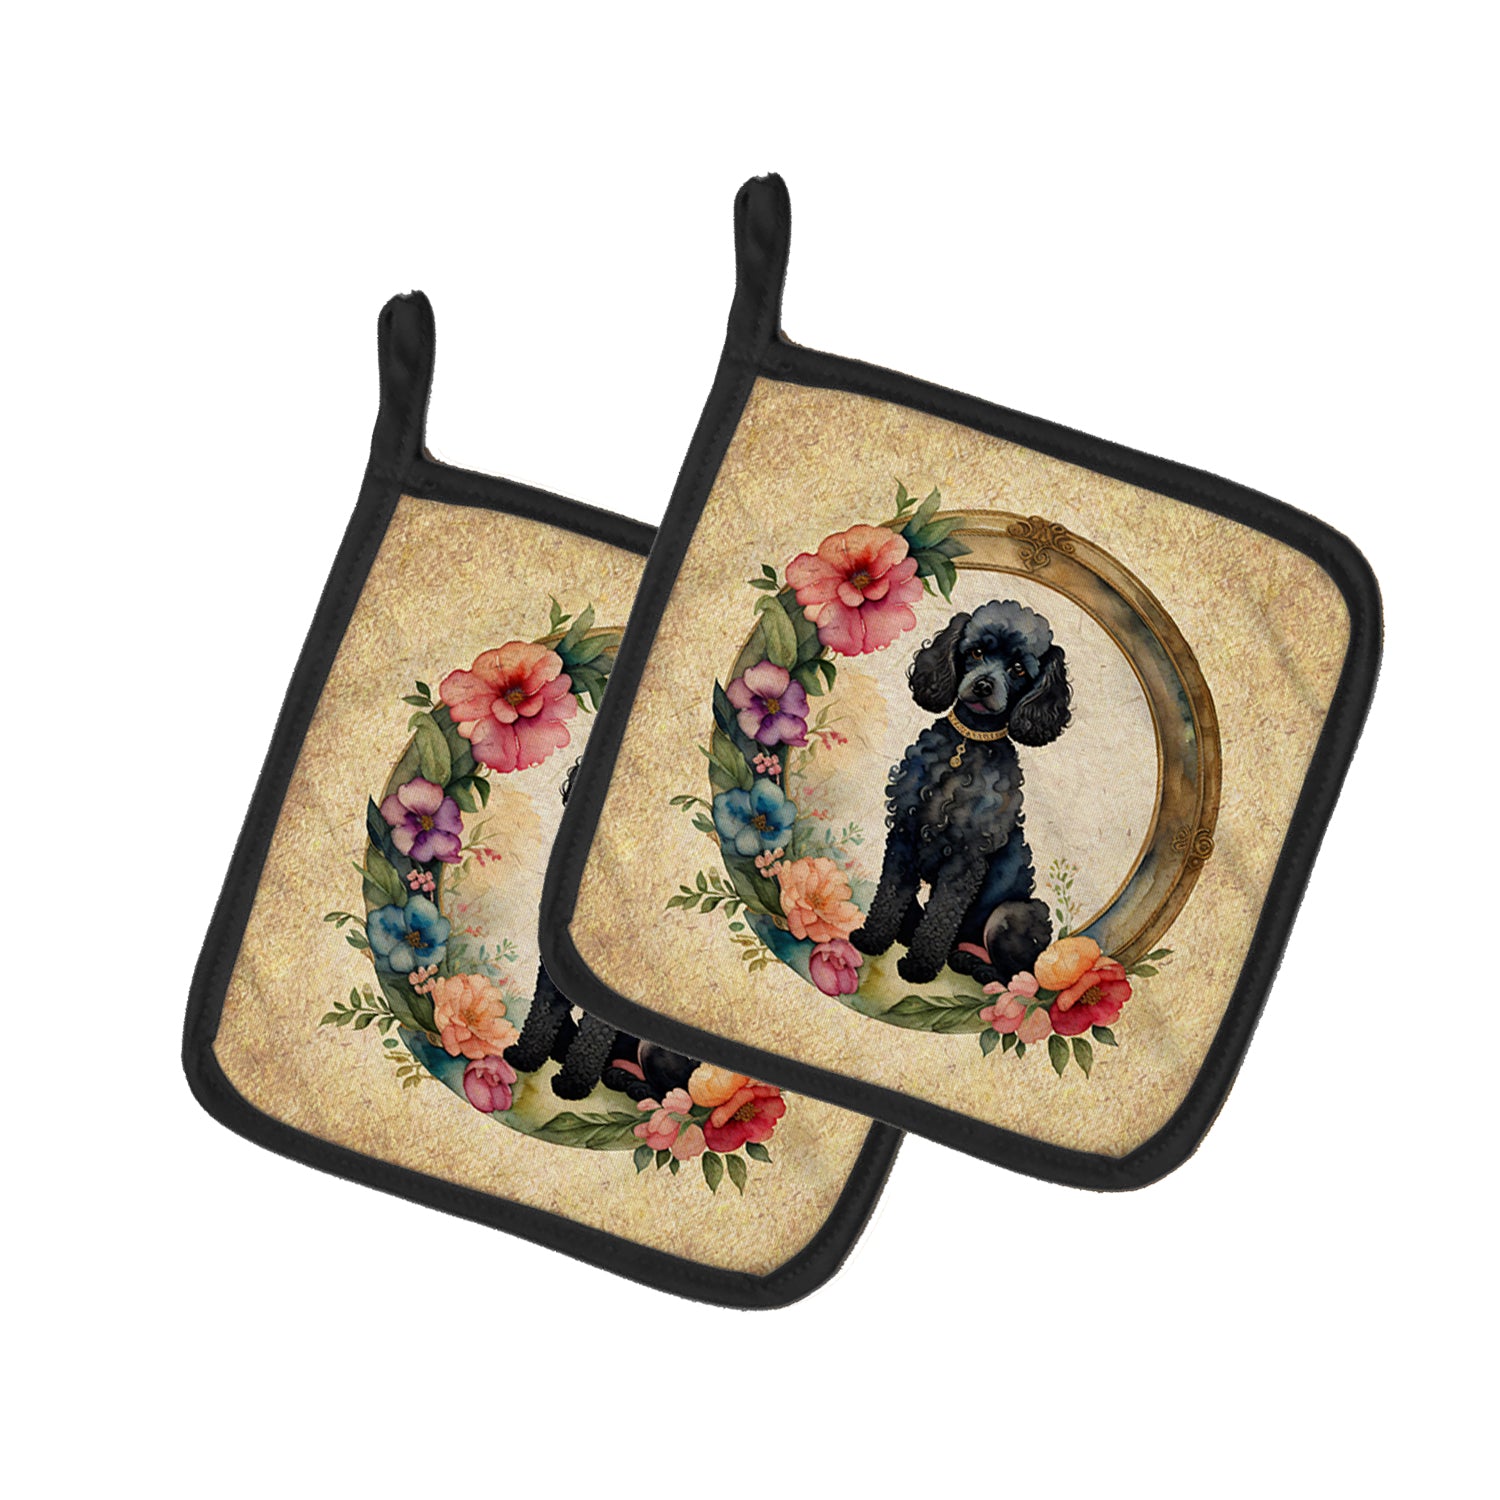 Buy this Black Poodle and Flowers Pair of Pot Holders